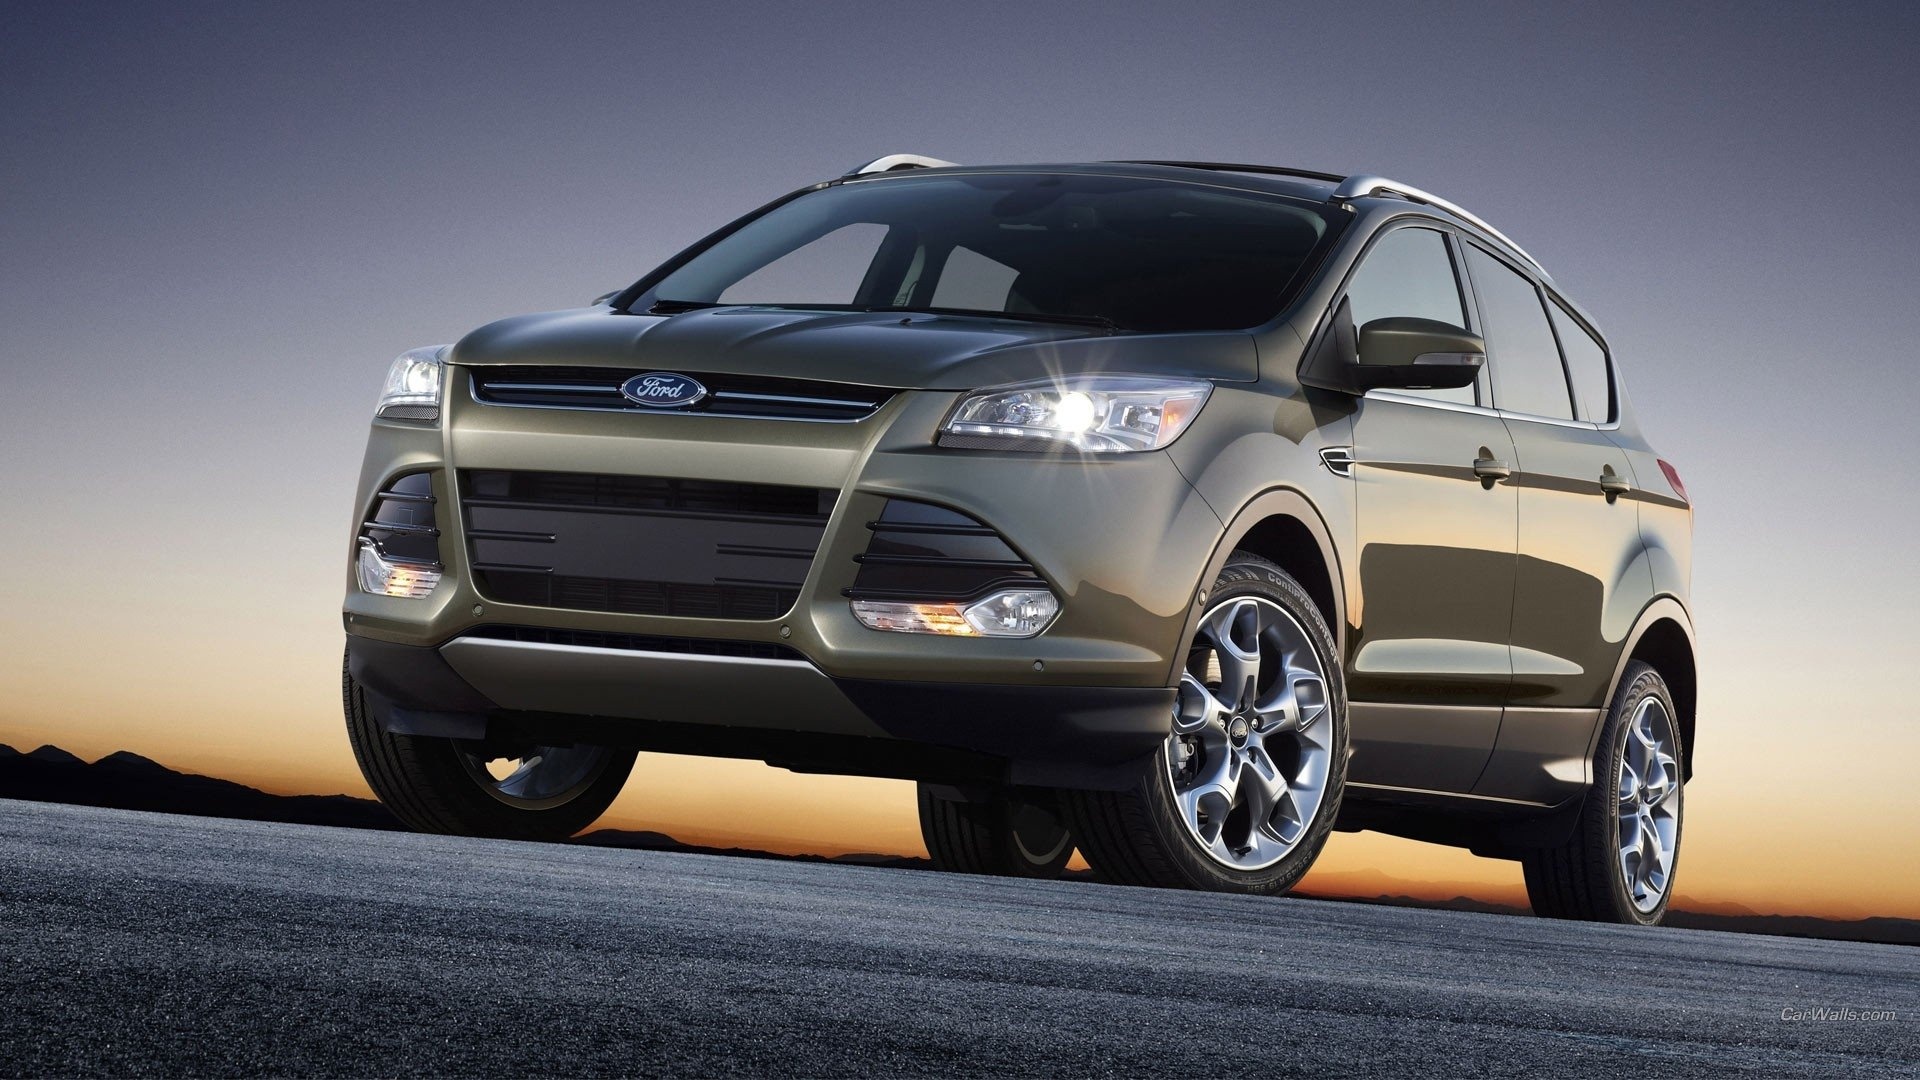 Ford Escape, HD wallpaper, Background image, Automotive excellence, 1920x1080 Full HD Desktop